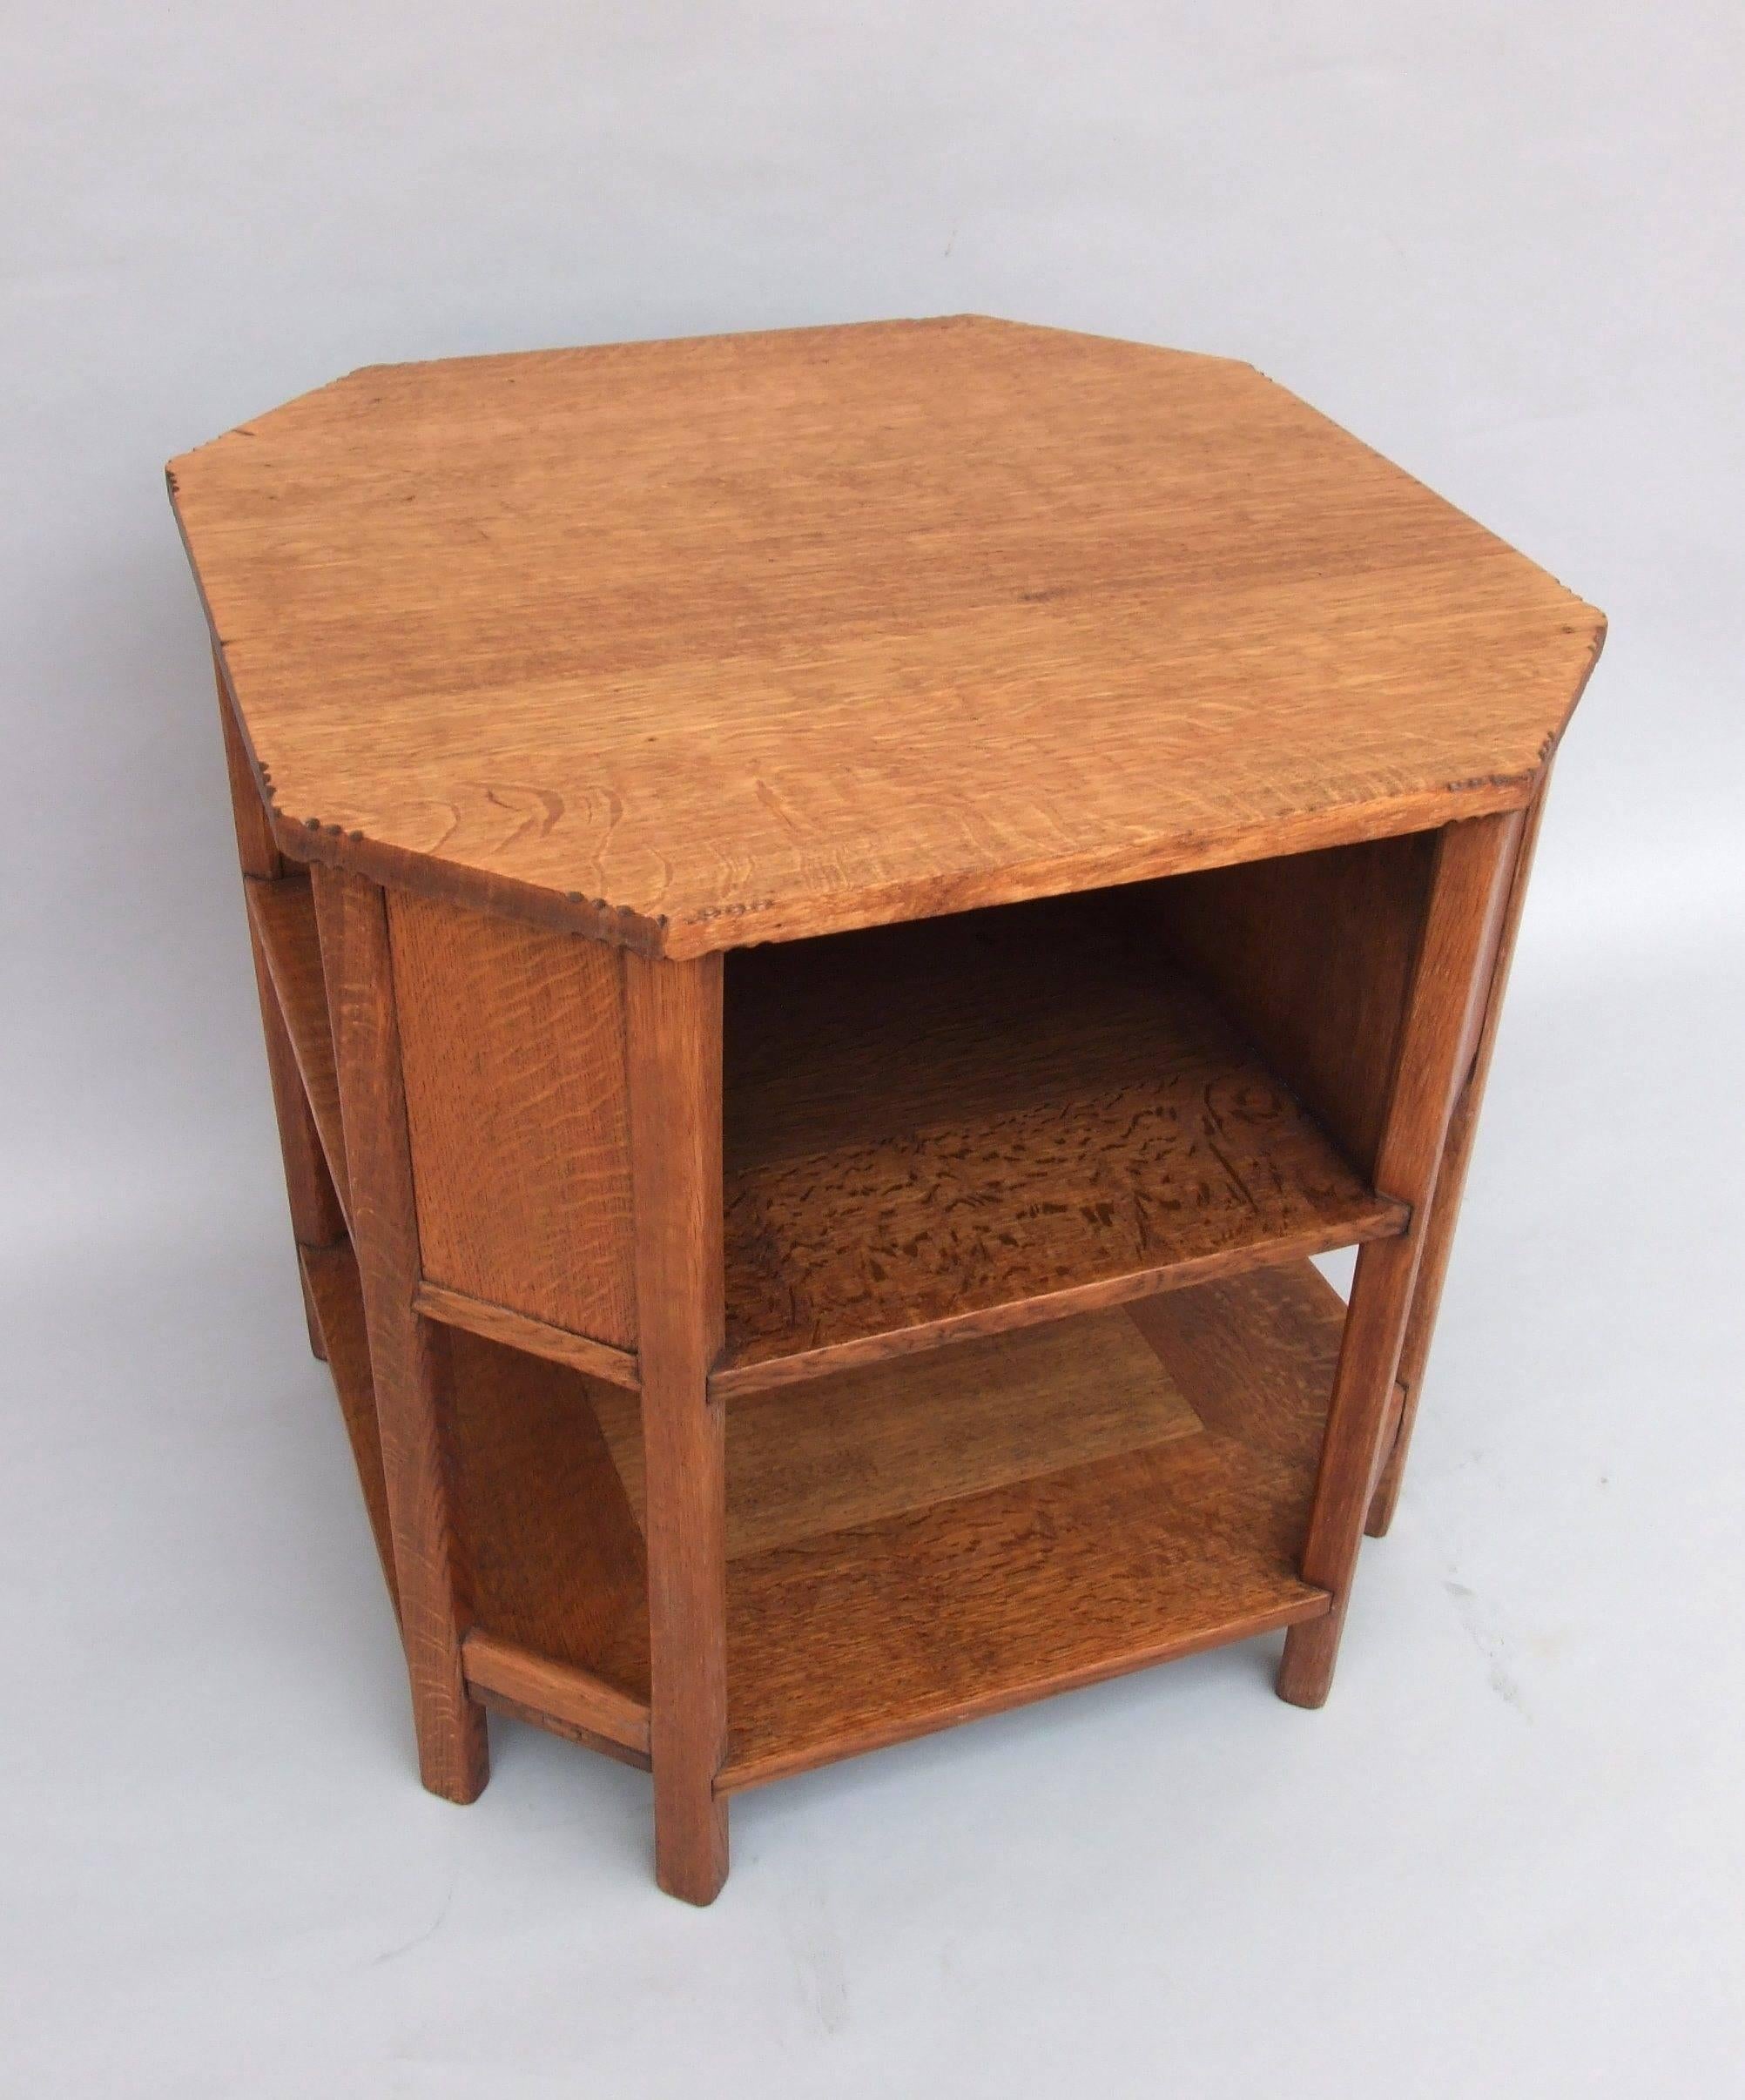 A quarter sawn oak Arts & Crafts octagonal book or coffee table with eight legs and chip carving to the top by Heal & Son, circa 1920. Measures: 62cm (24in) high, 62cm (24in) wide, 62cm (24in) deep. Illustrated p.83 'A History of Heal's' by